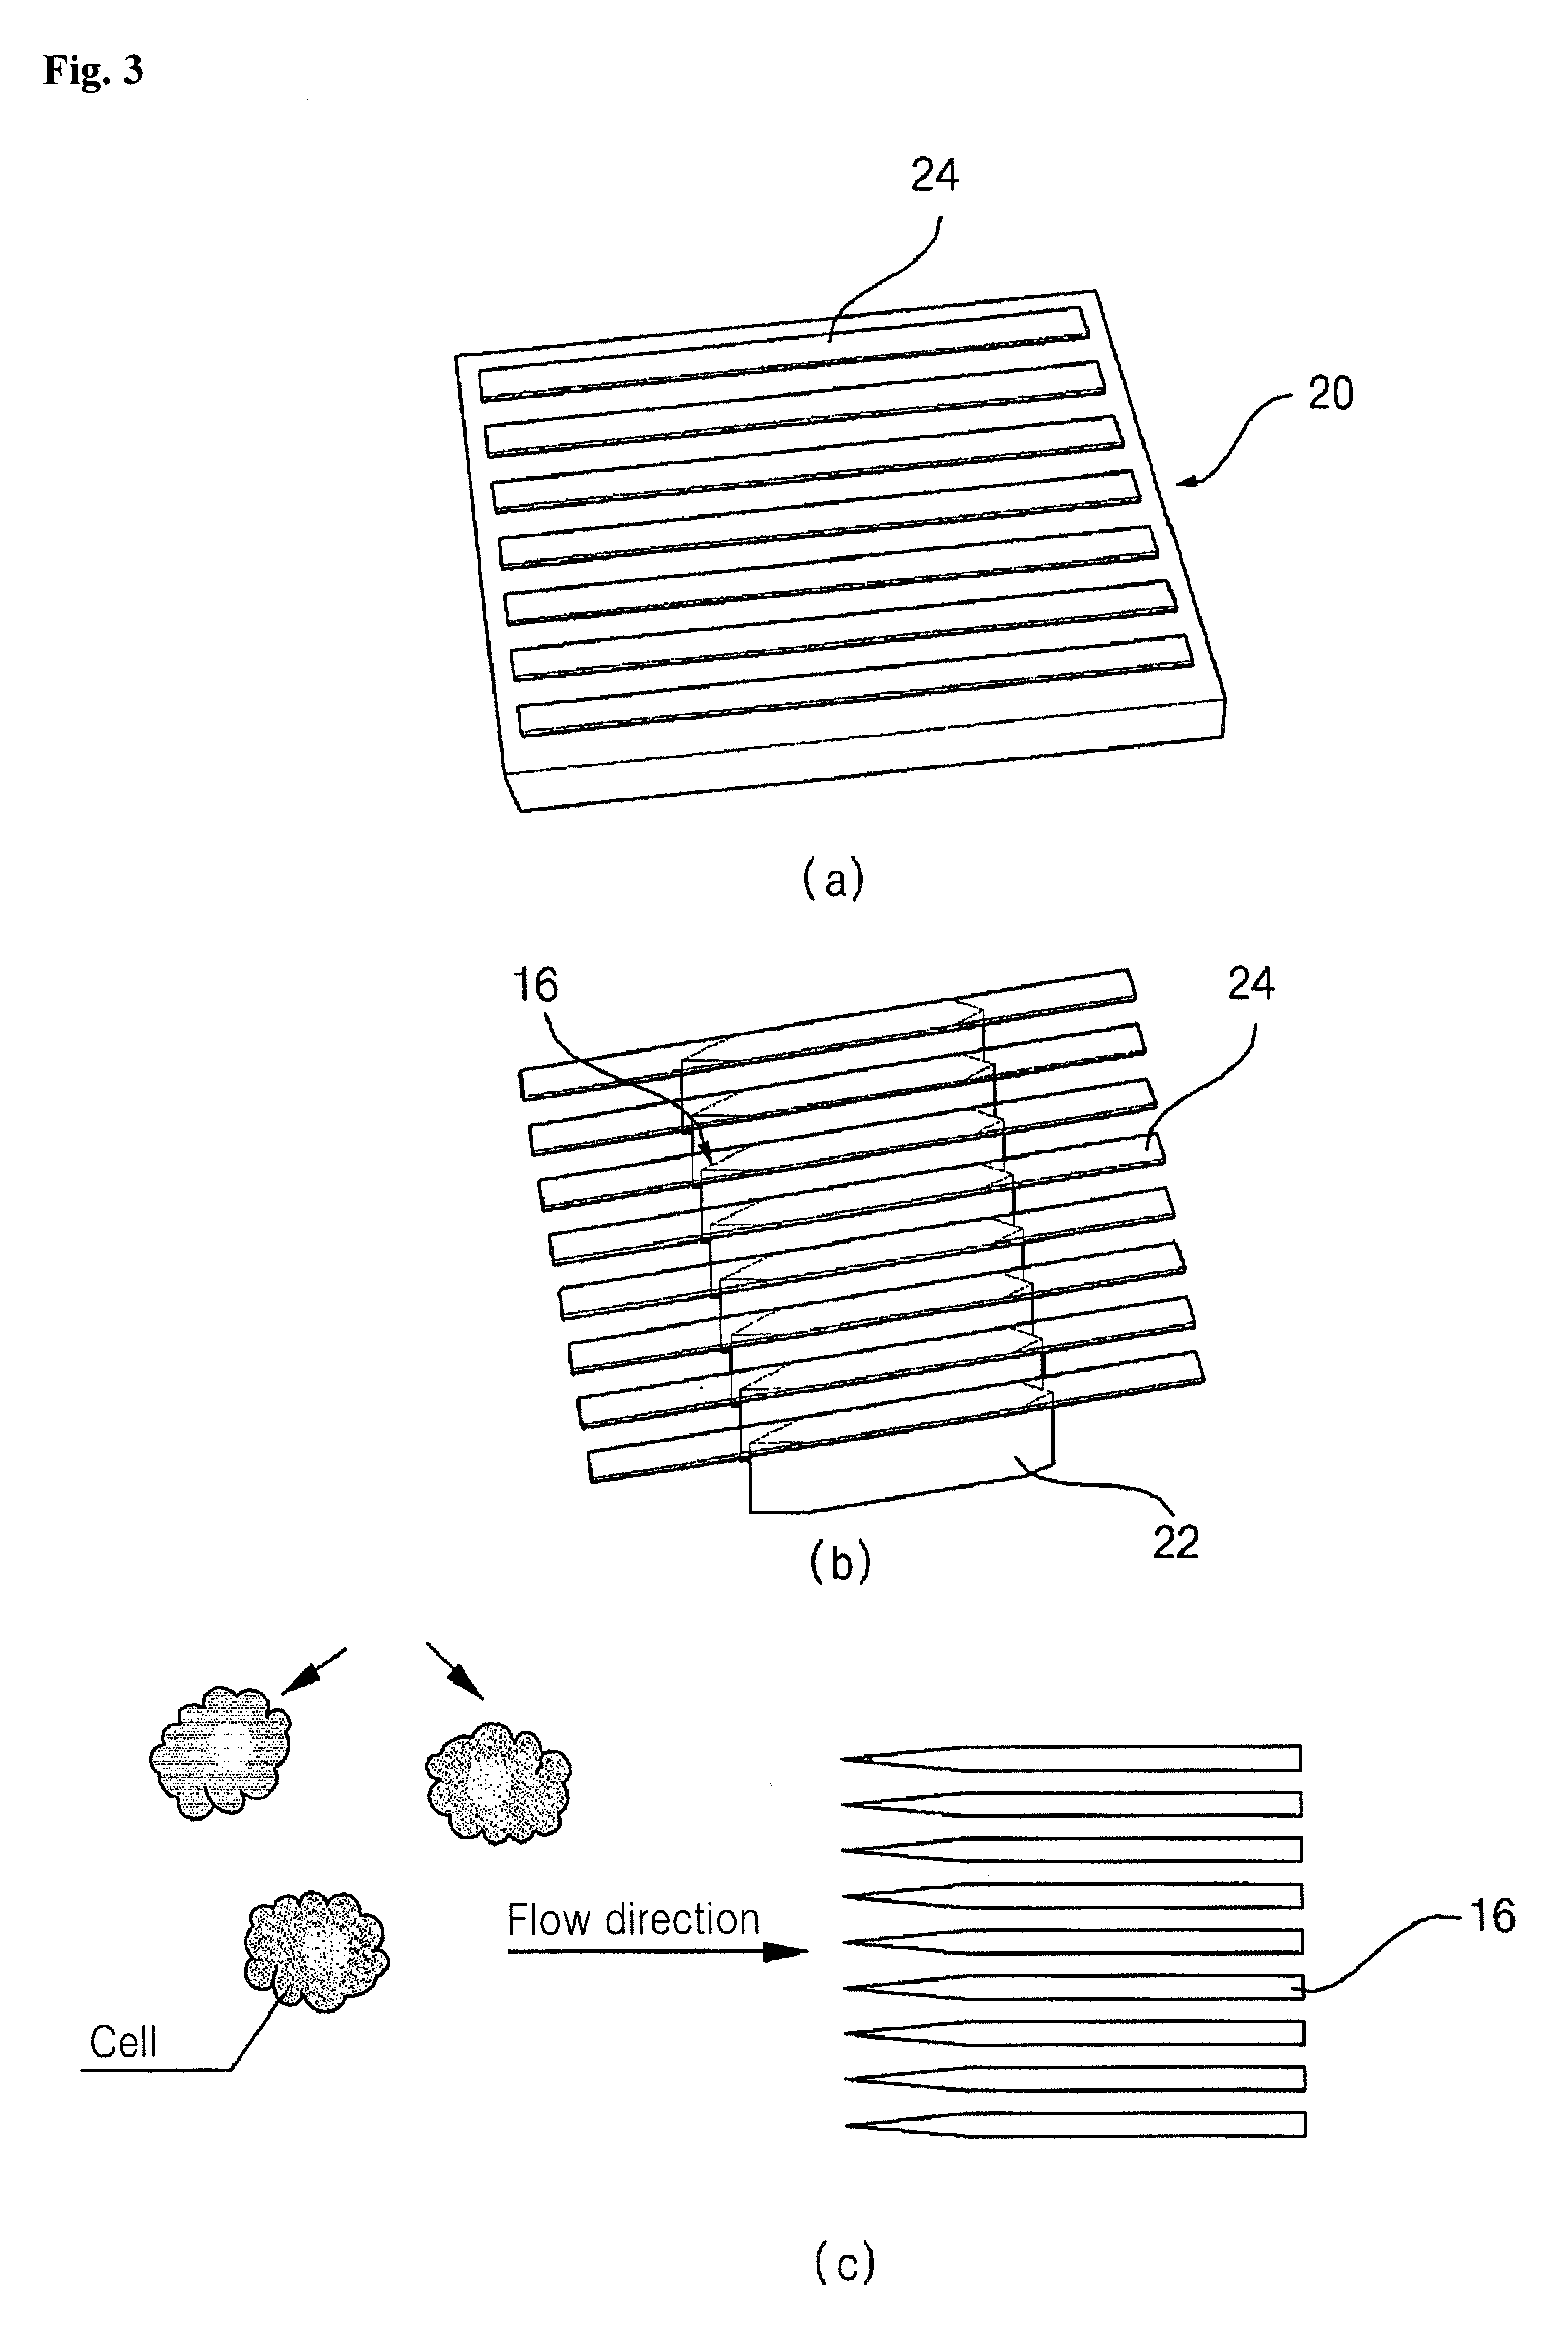 Mechanical cell lysis apparatus